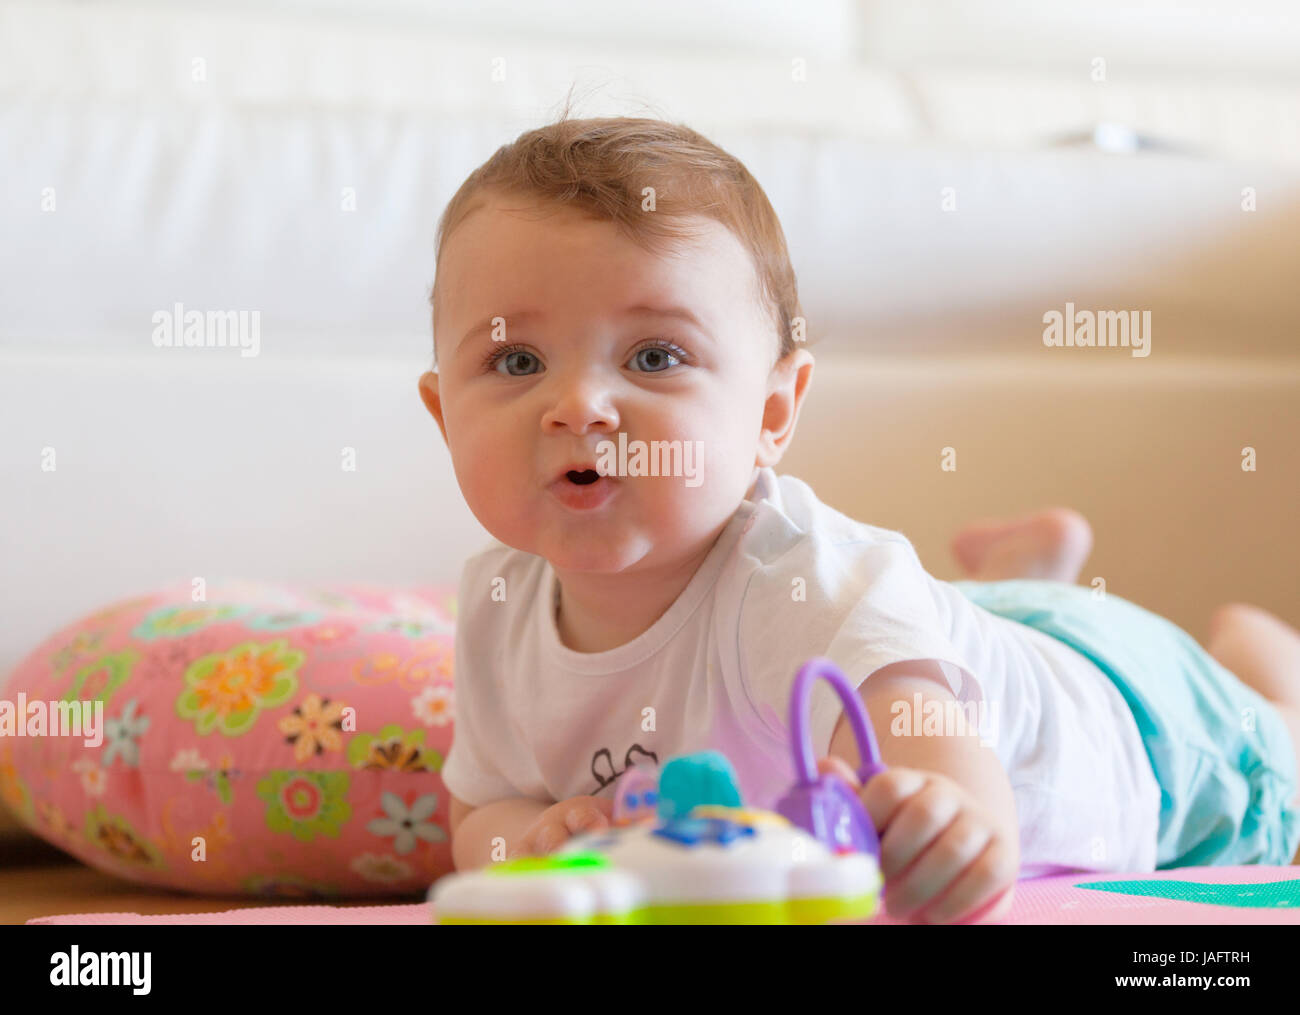 Toddler plays on the colored rubber mat. Stock Photo